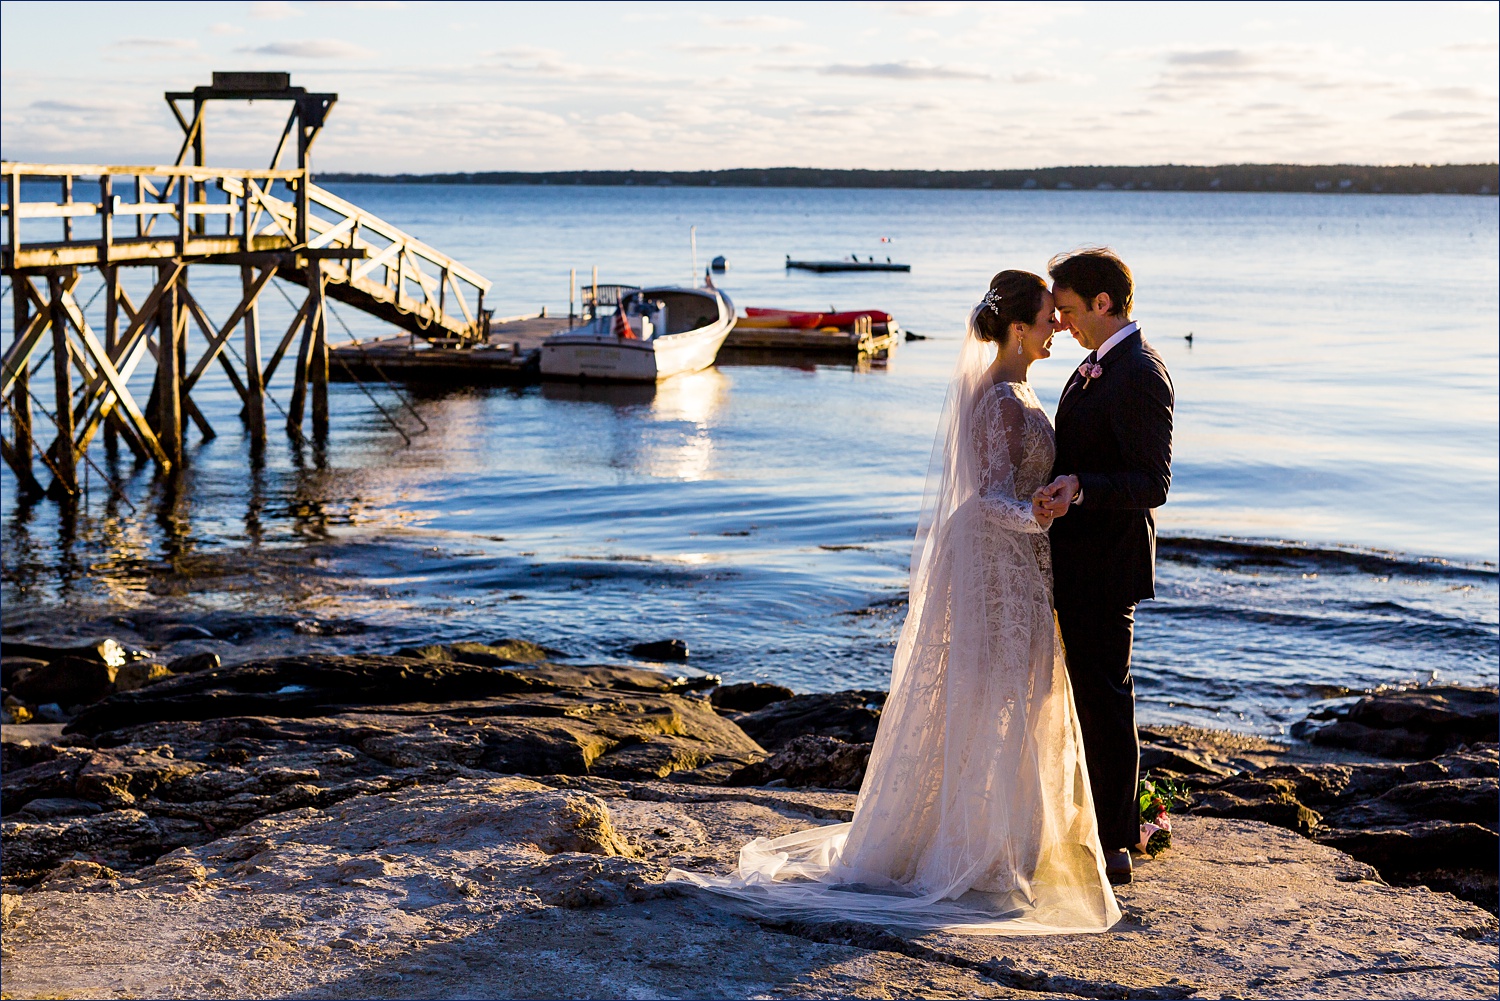 The newlyweds at Boothbay Harbor Maine and enjoy a quiet moment